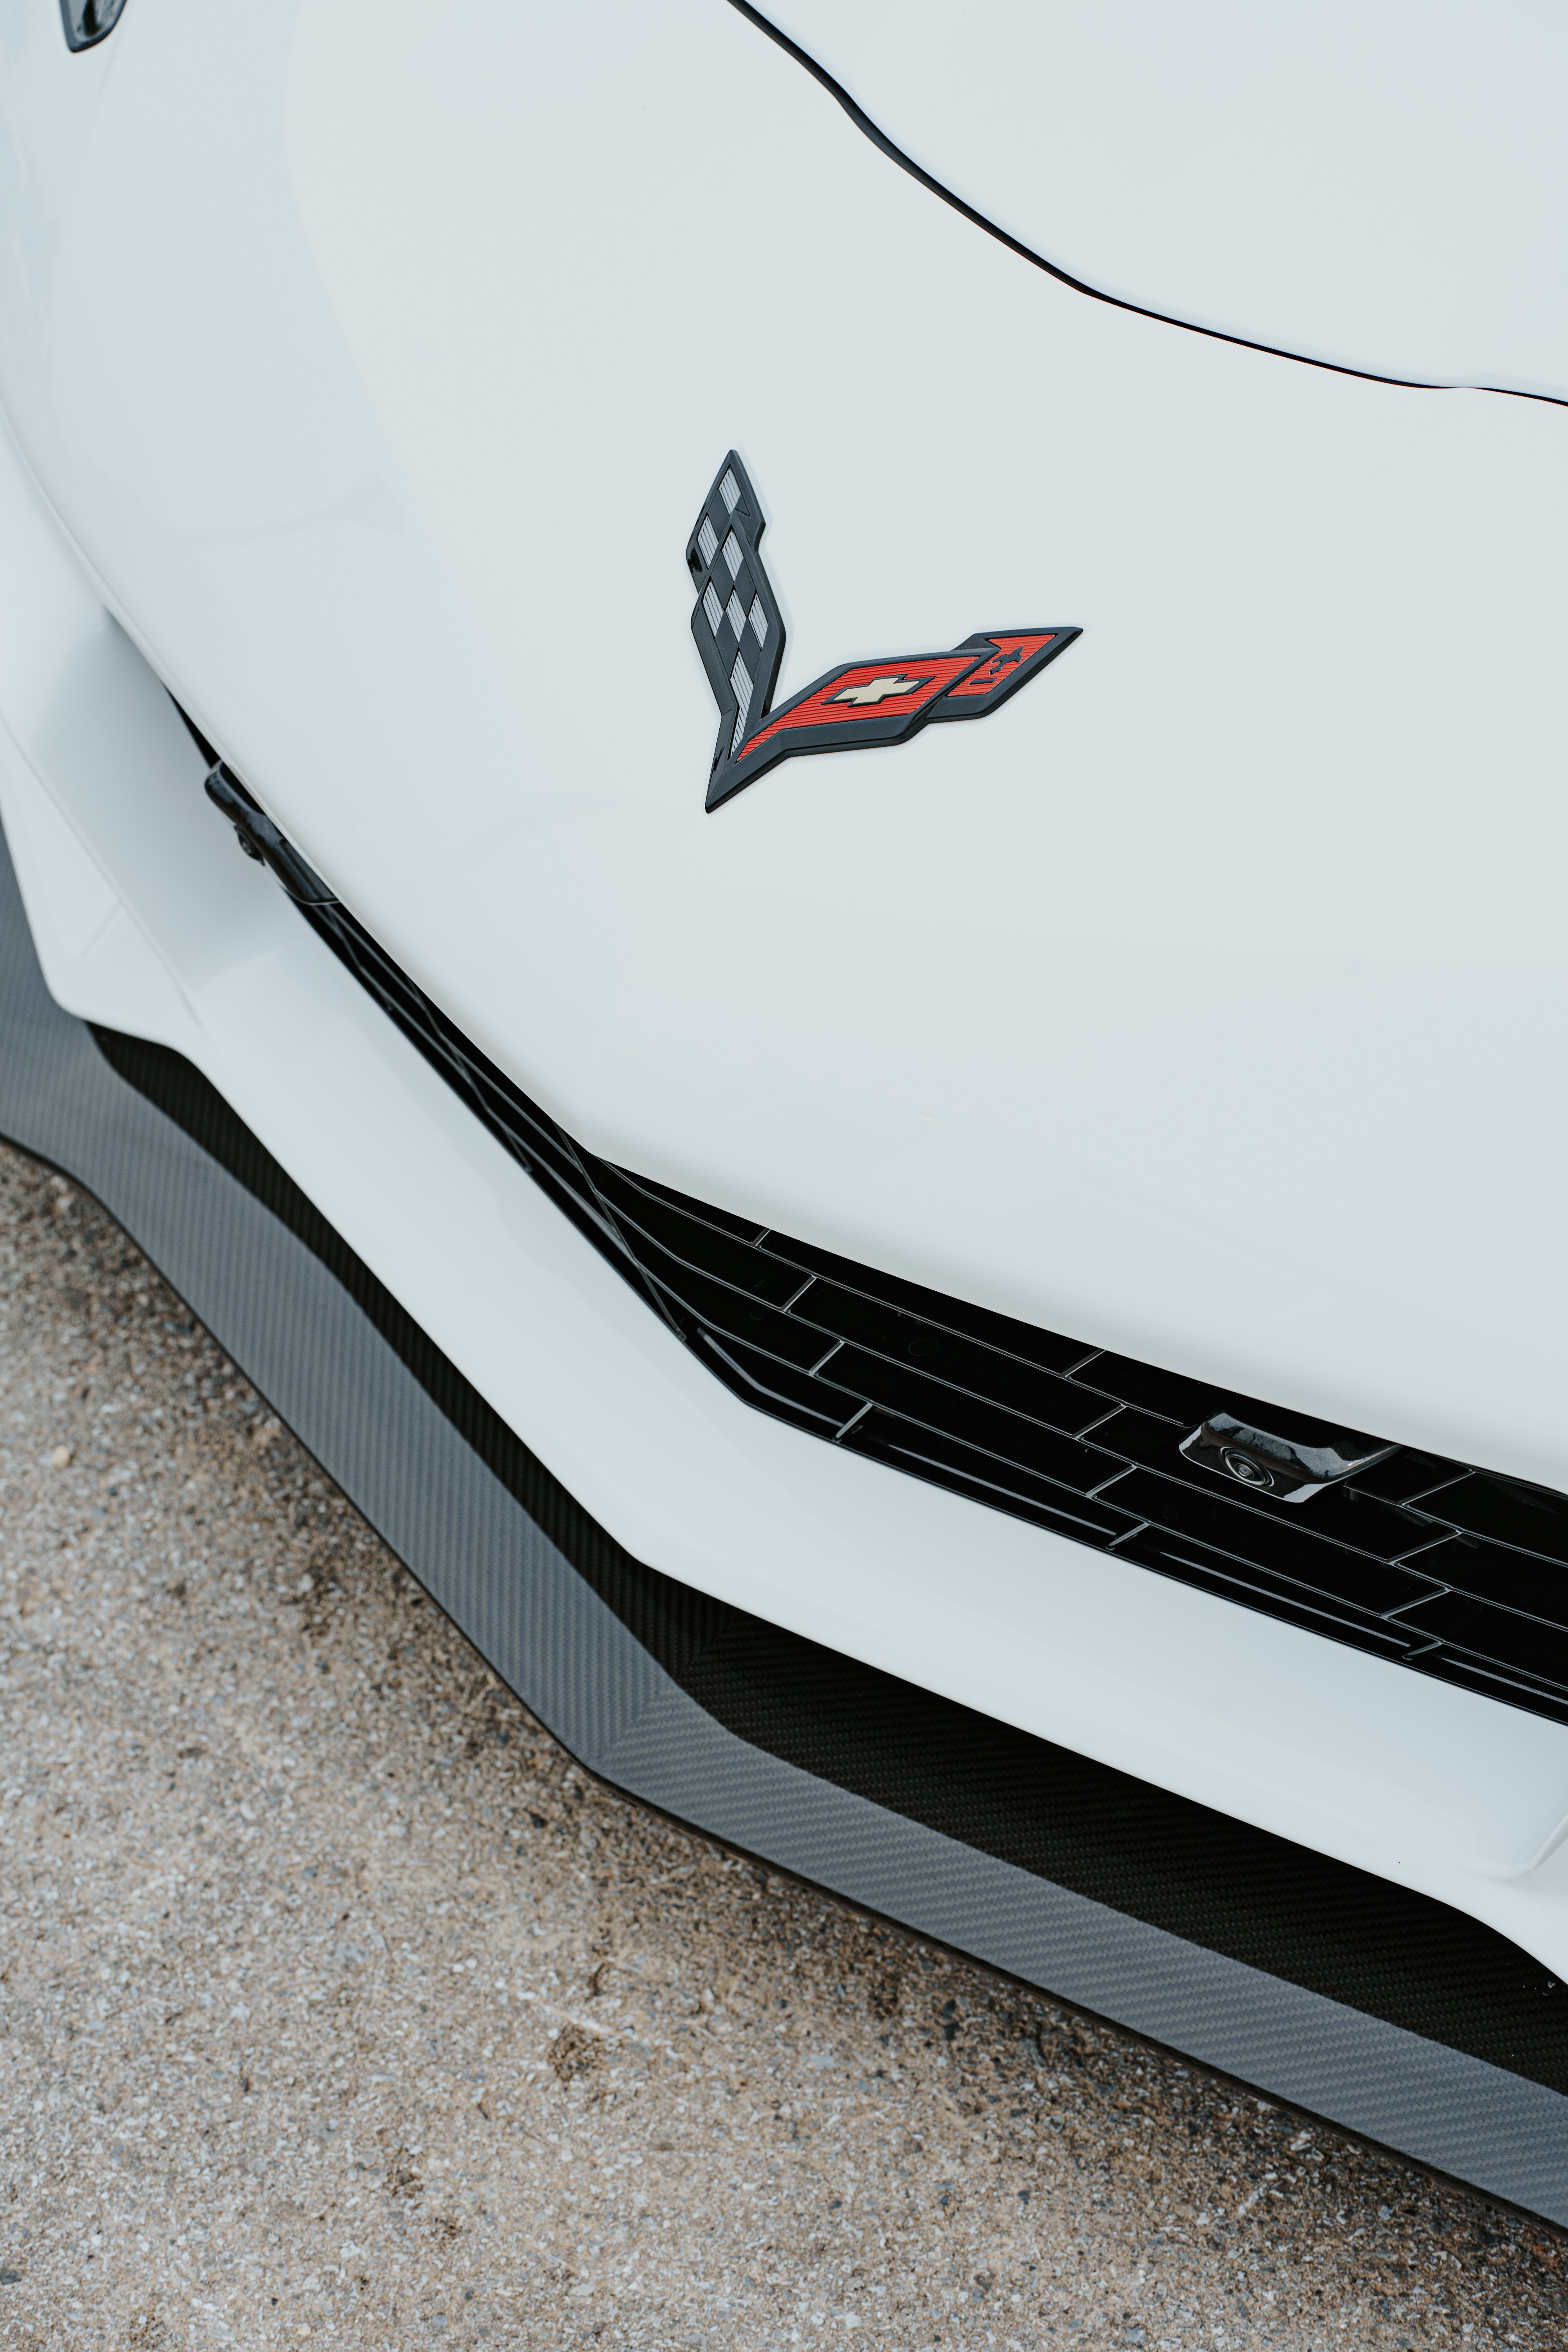 corvette monthly and quarterly sales